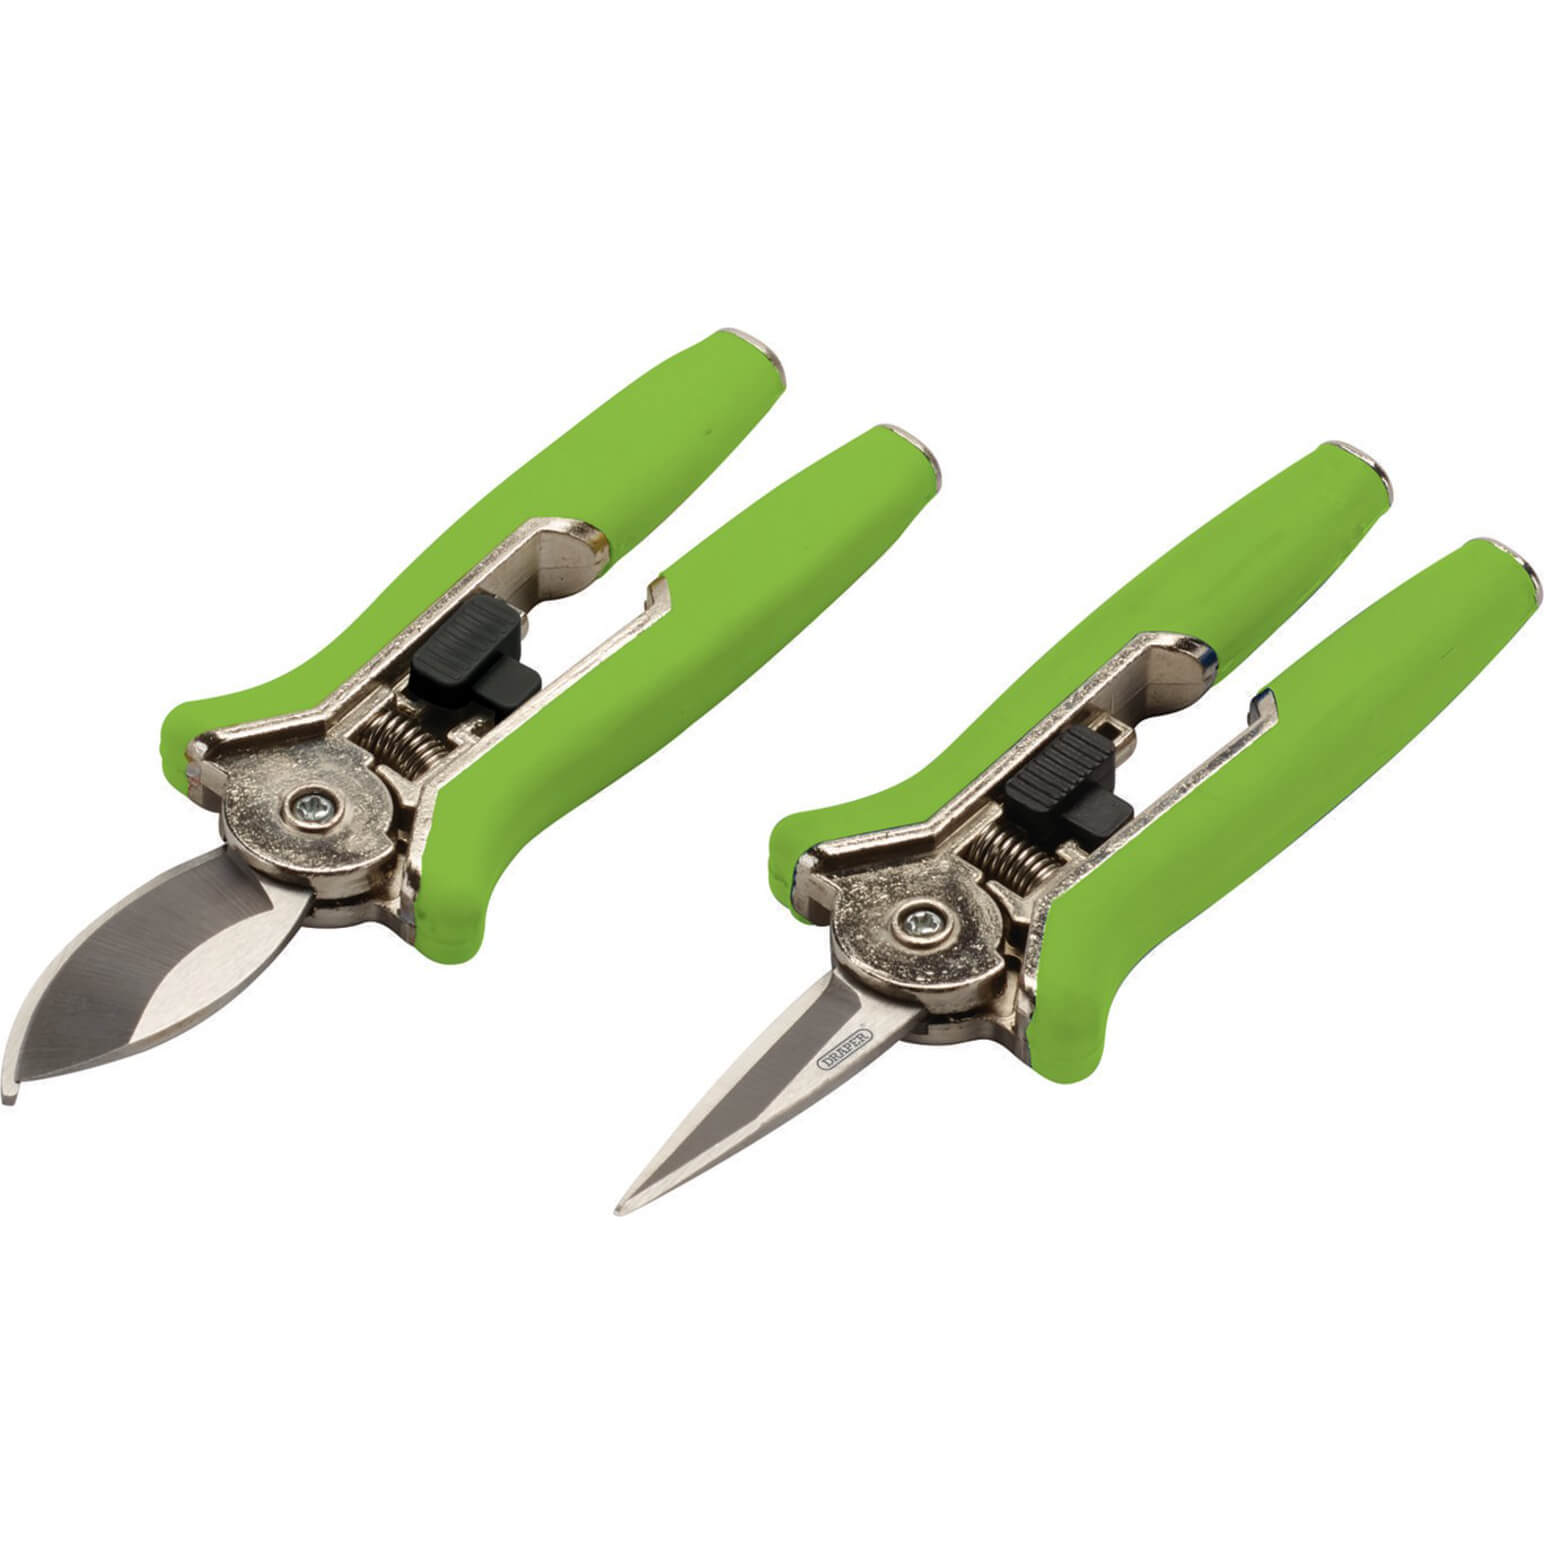 Image of Draper 2 Piece Bypass Pruning Snips Set